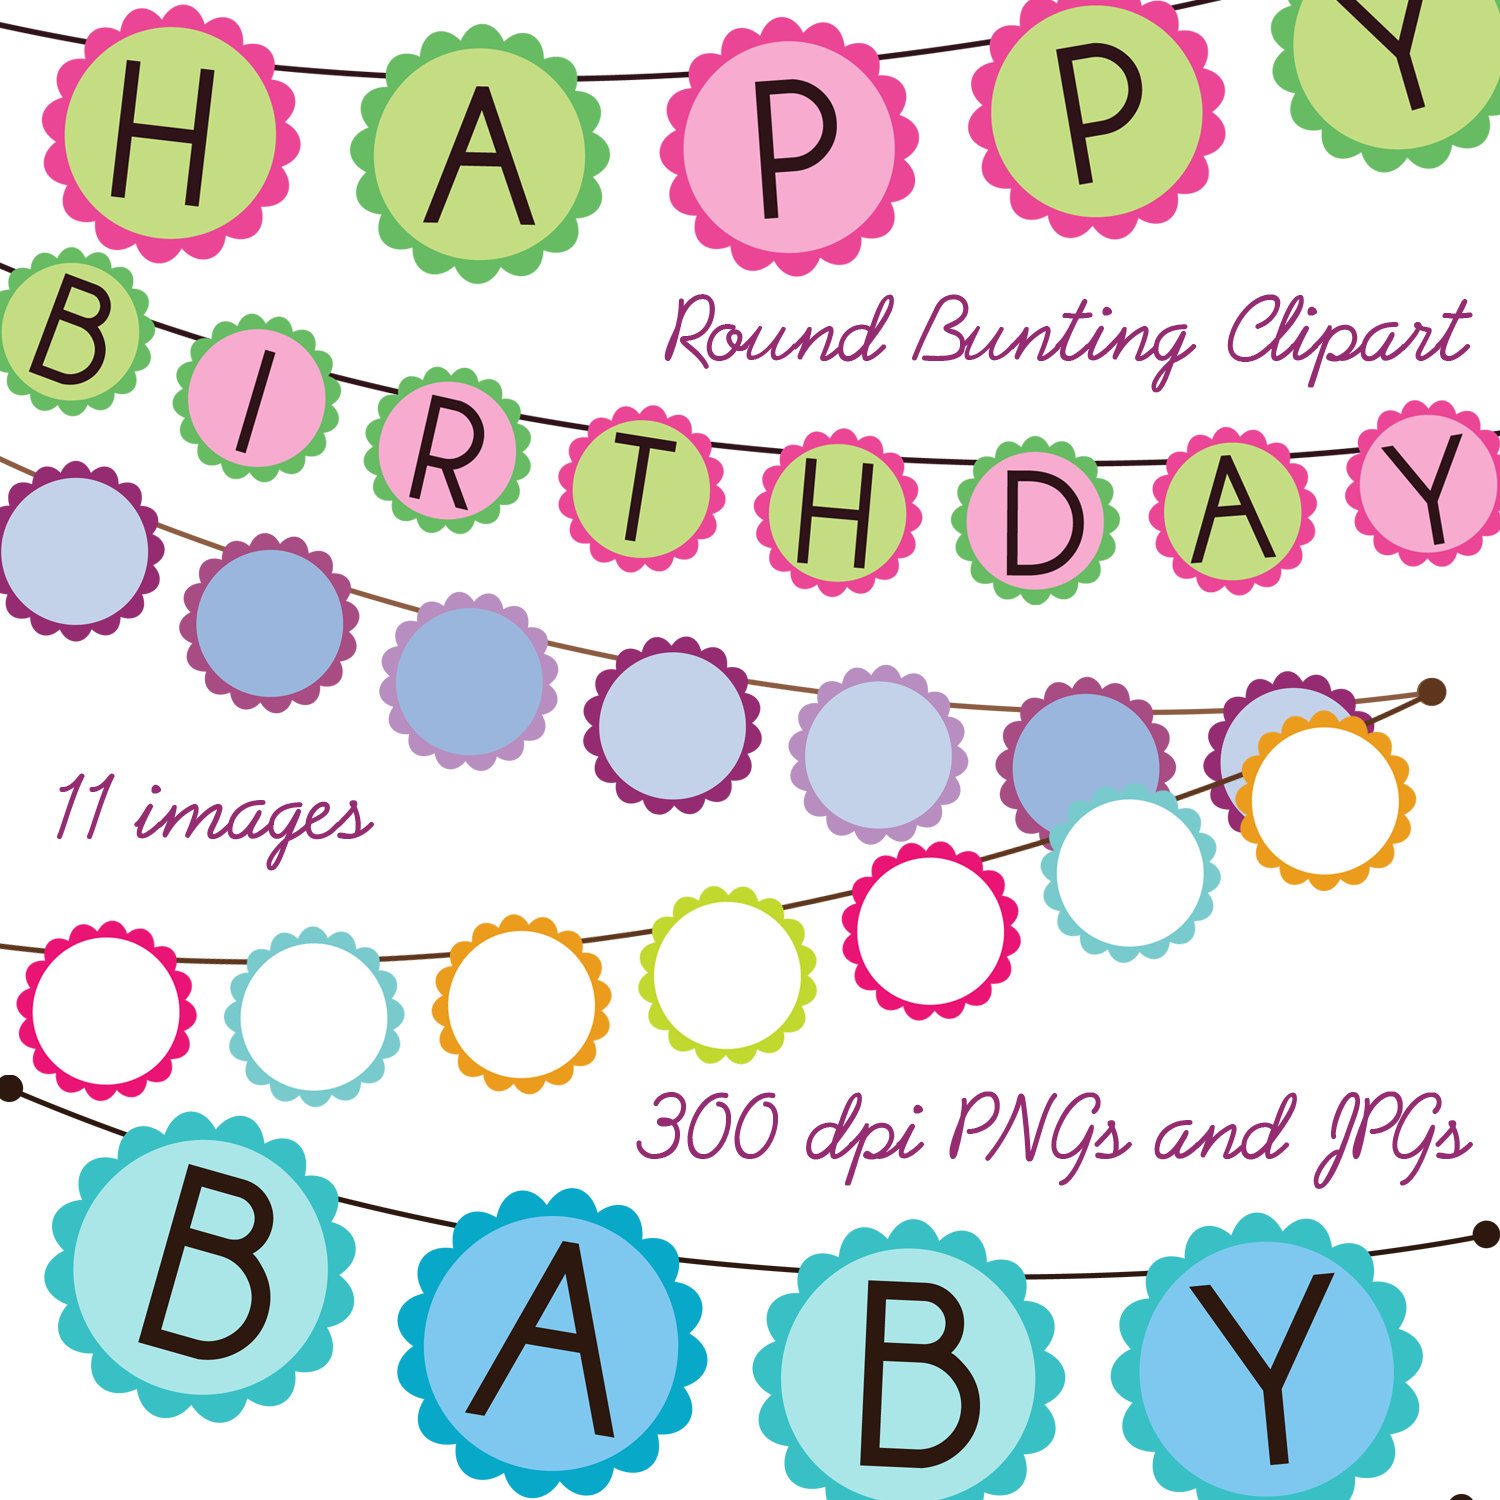 Popular items for bunting clip art on Etsy